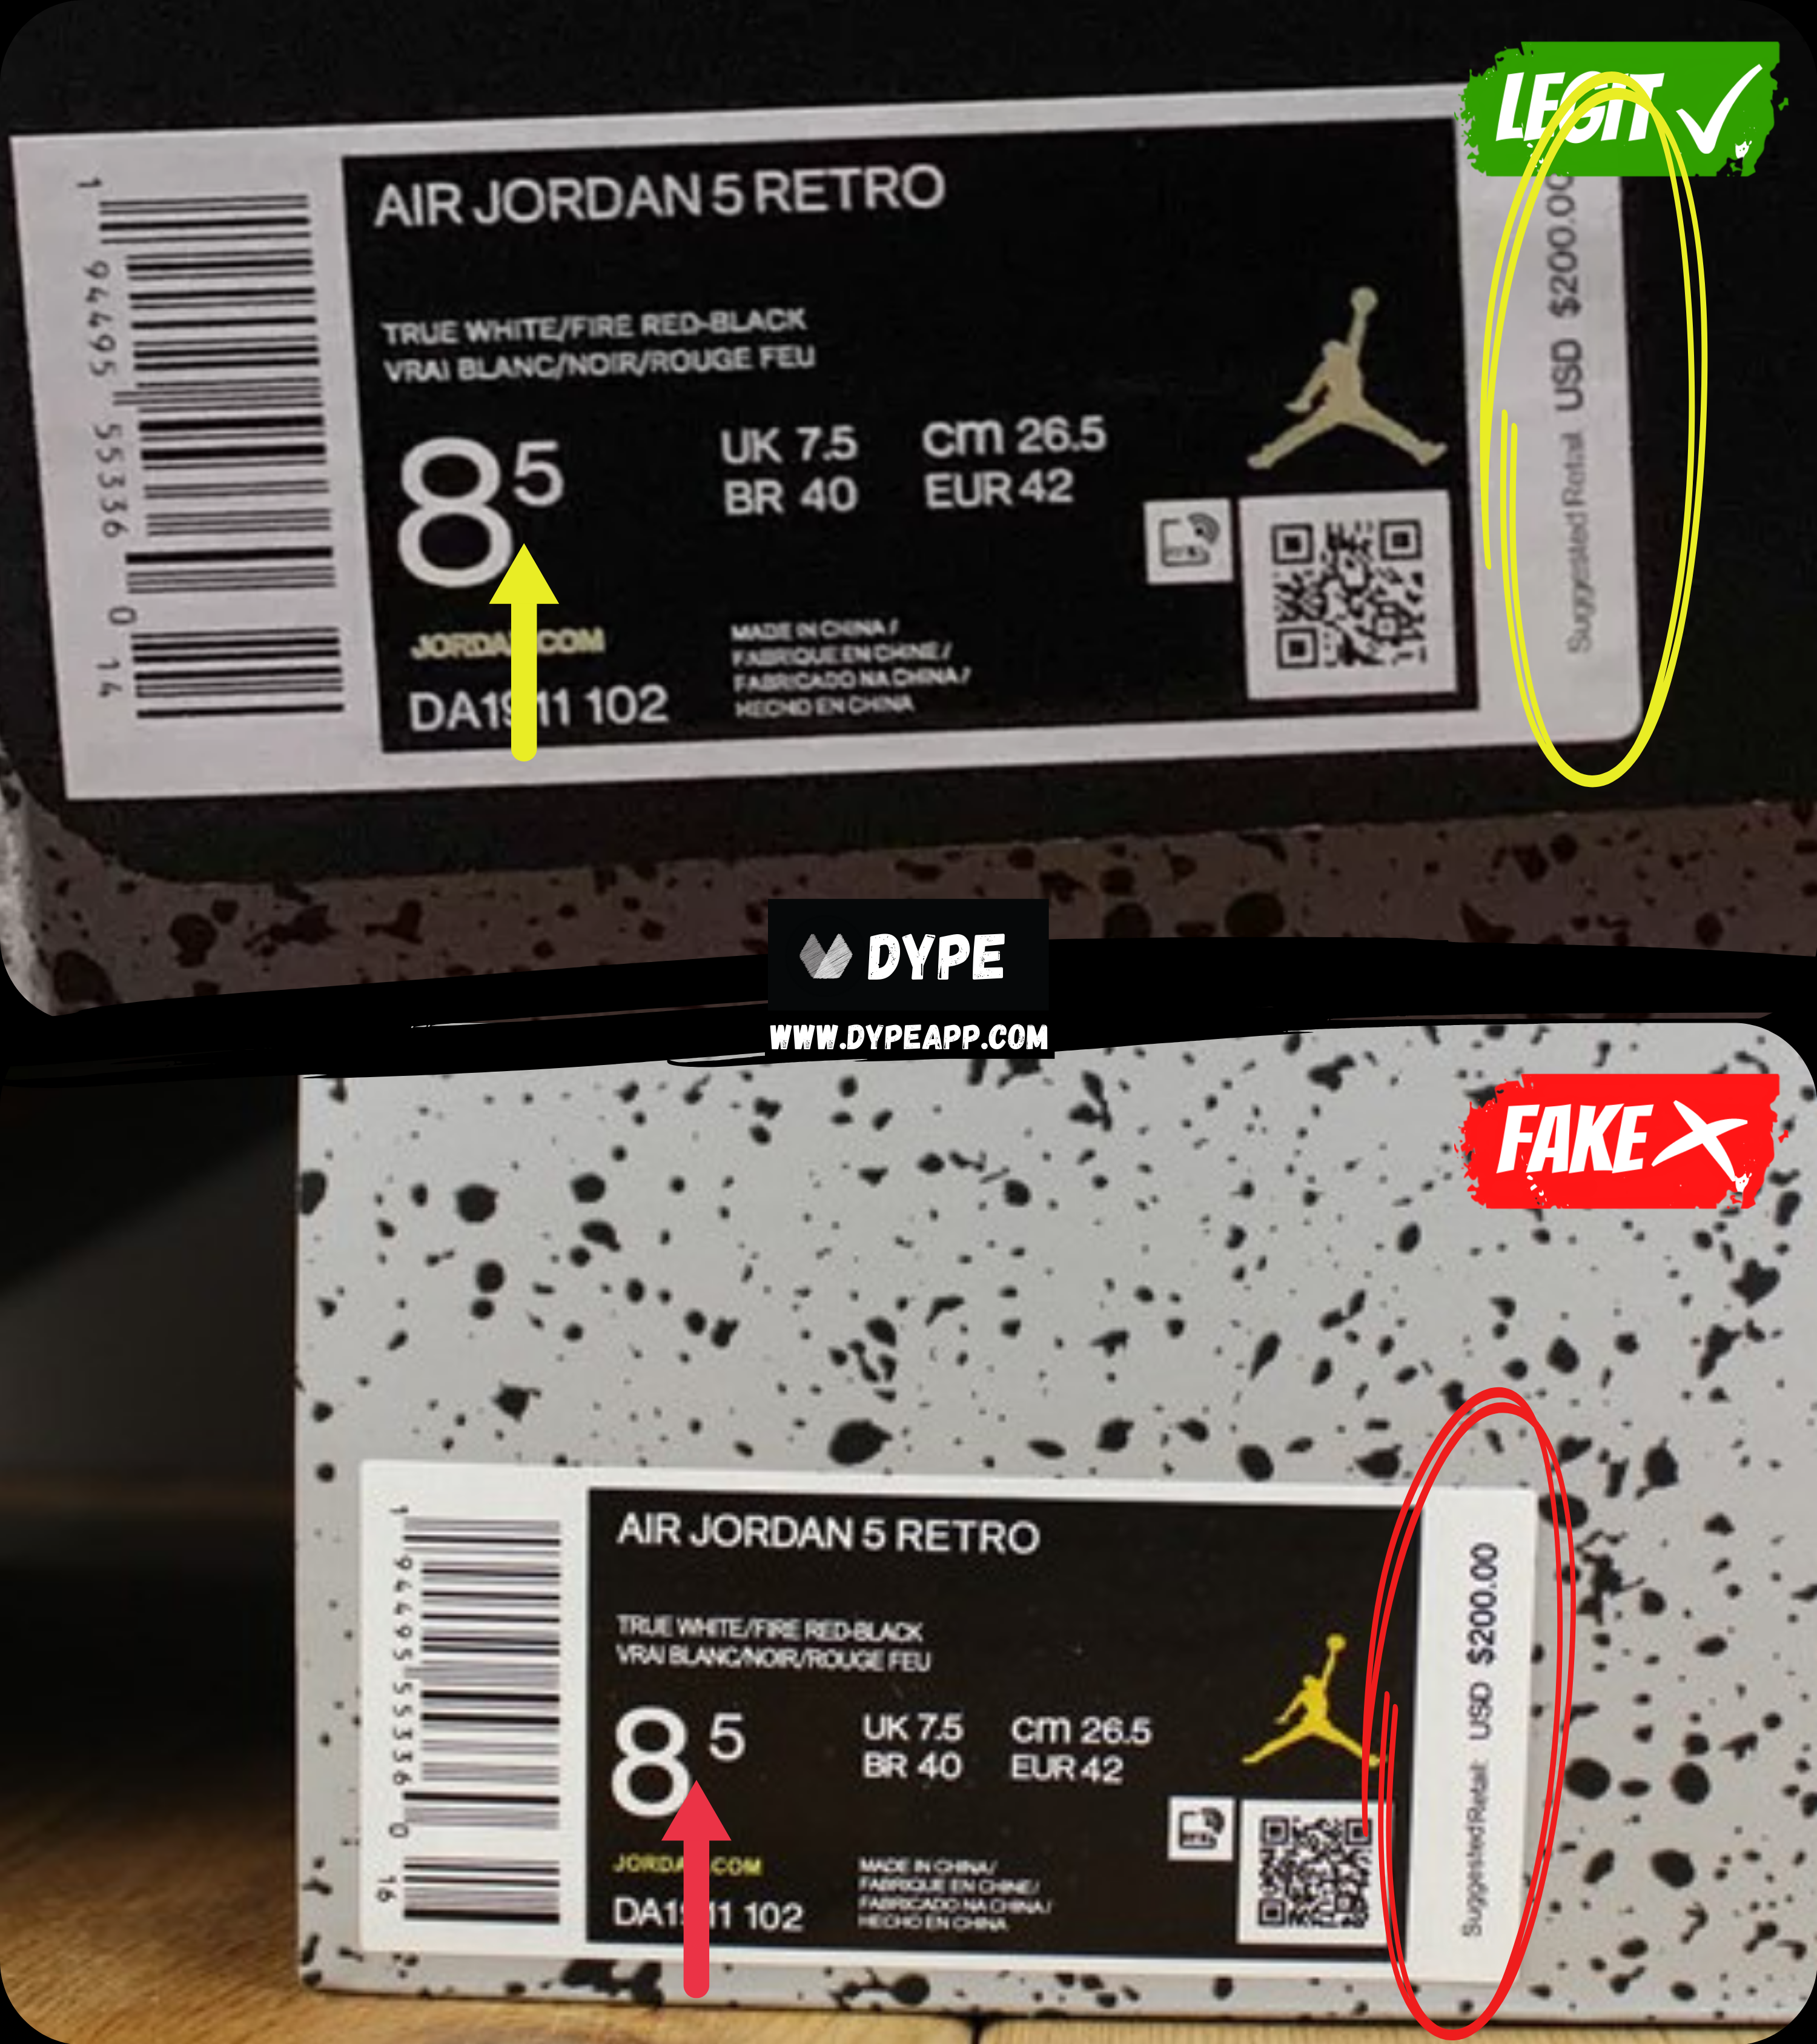 How To Tell If Your 'Black' Supreme Air Jordan 5s Are Real or Fake